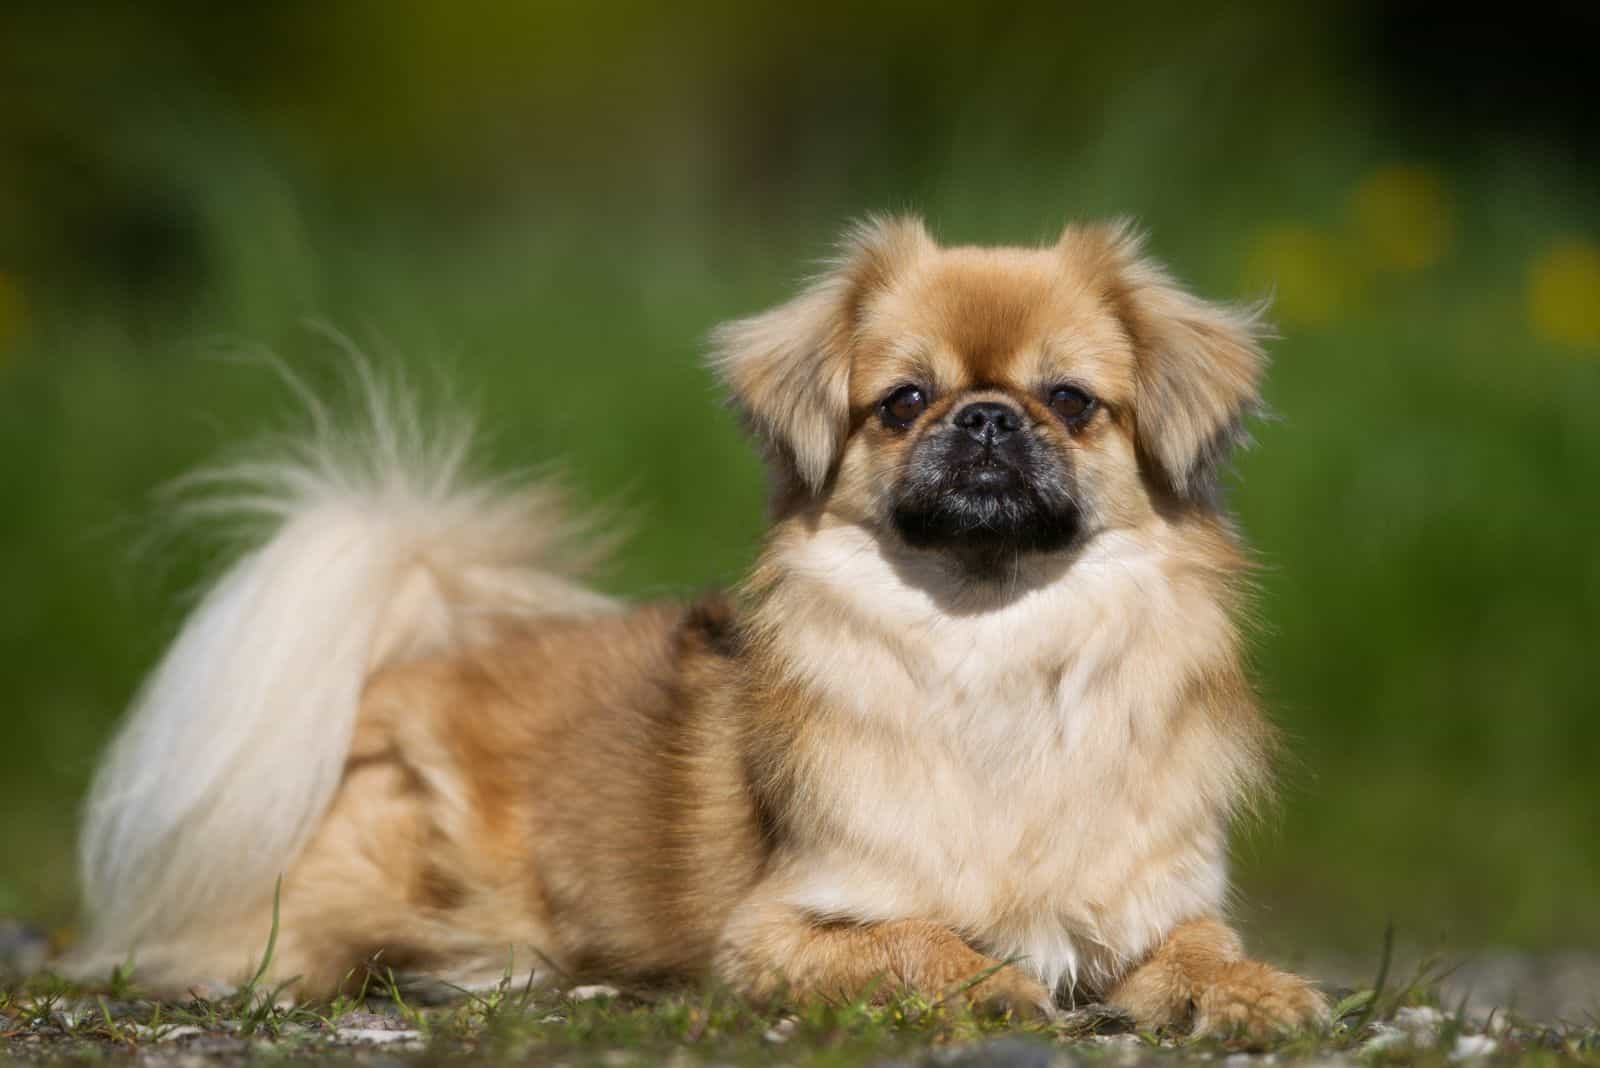 Tibetan Spaniel is lying down and resting